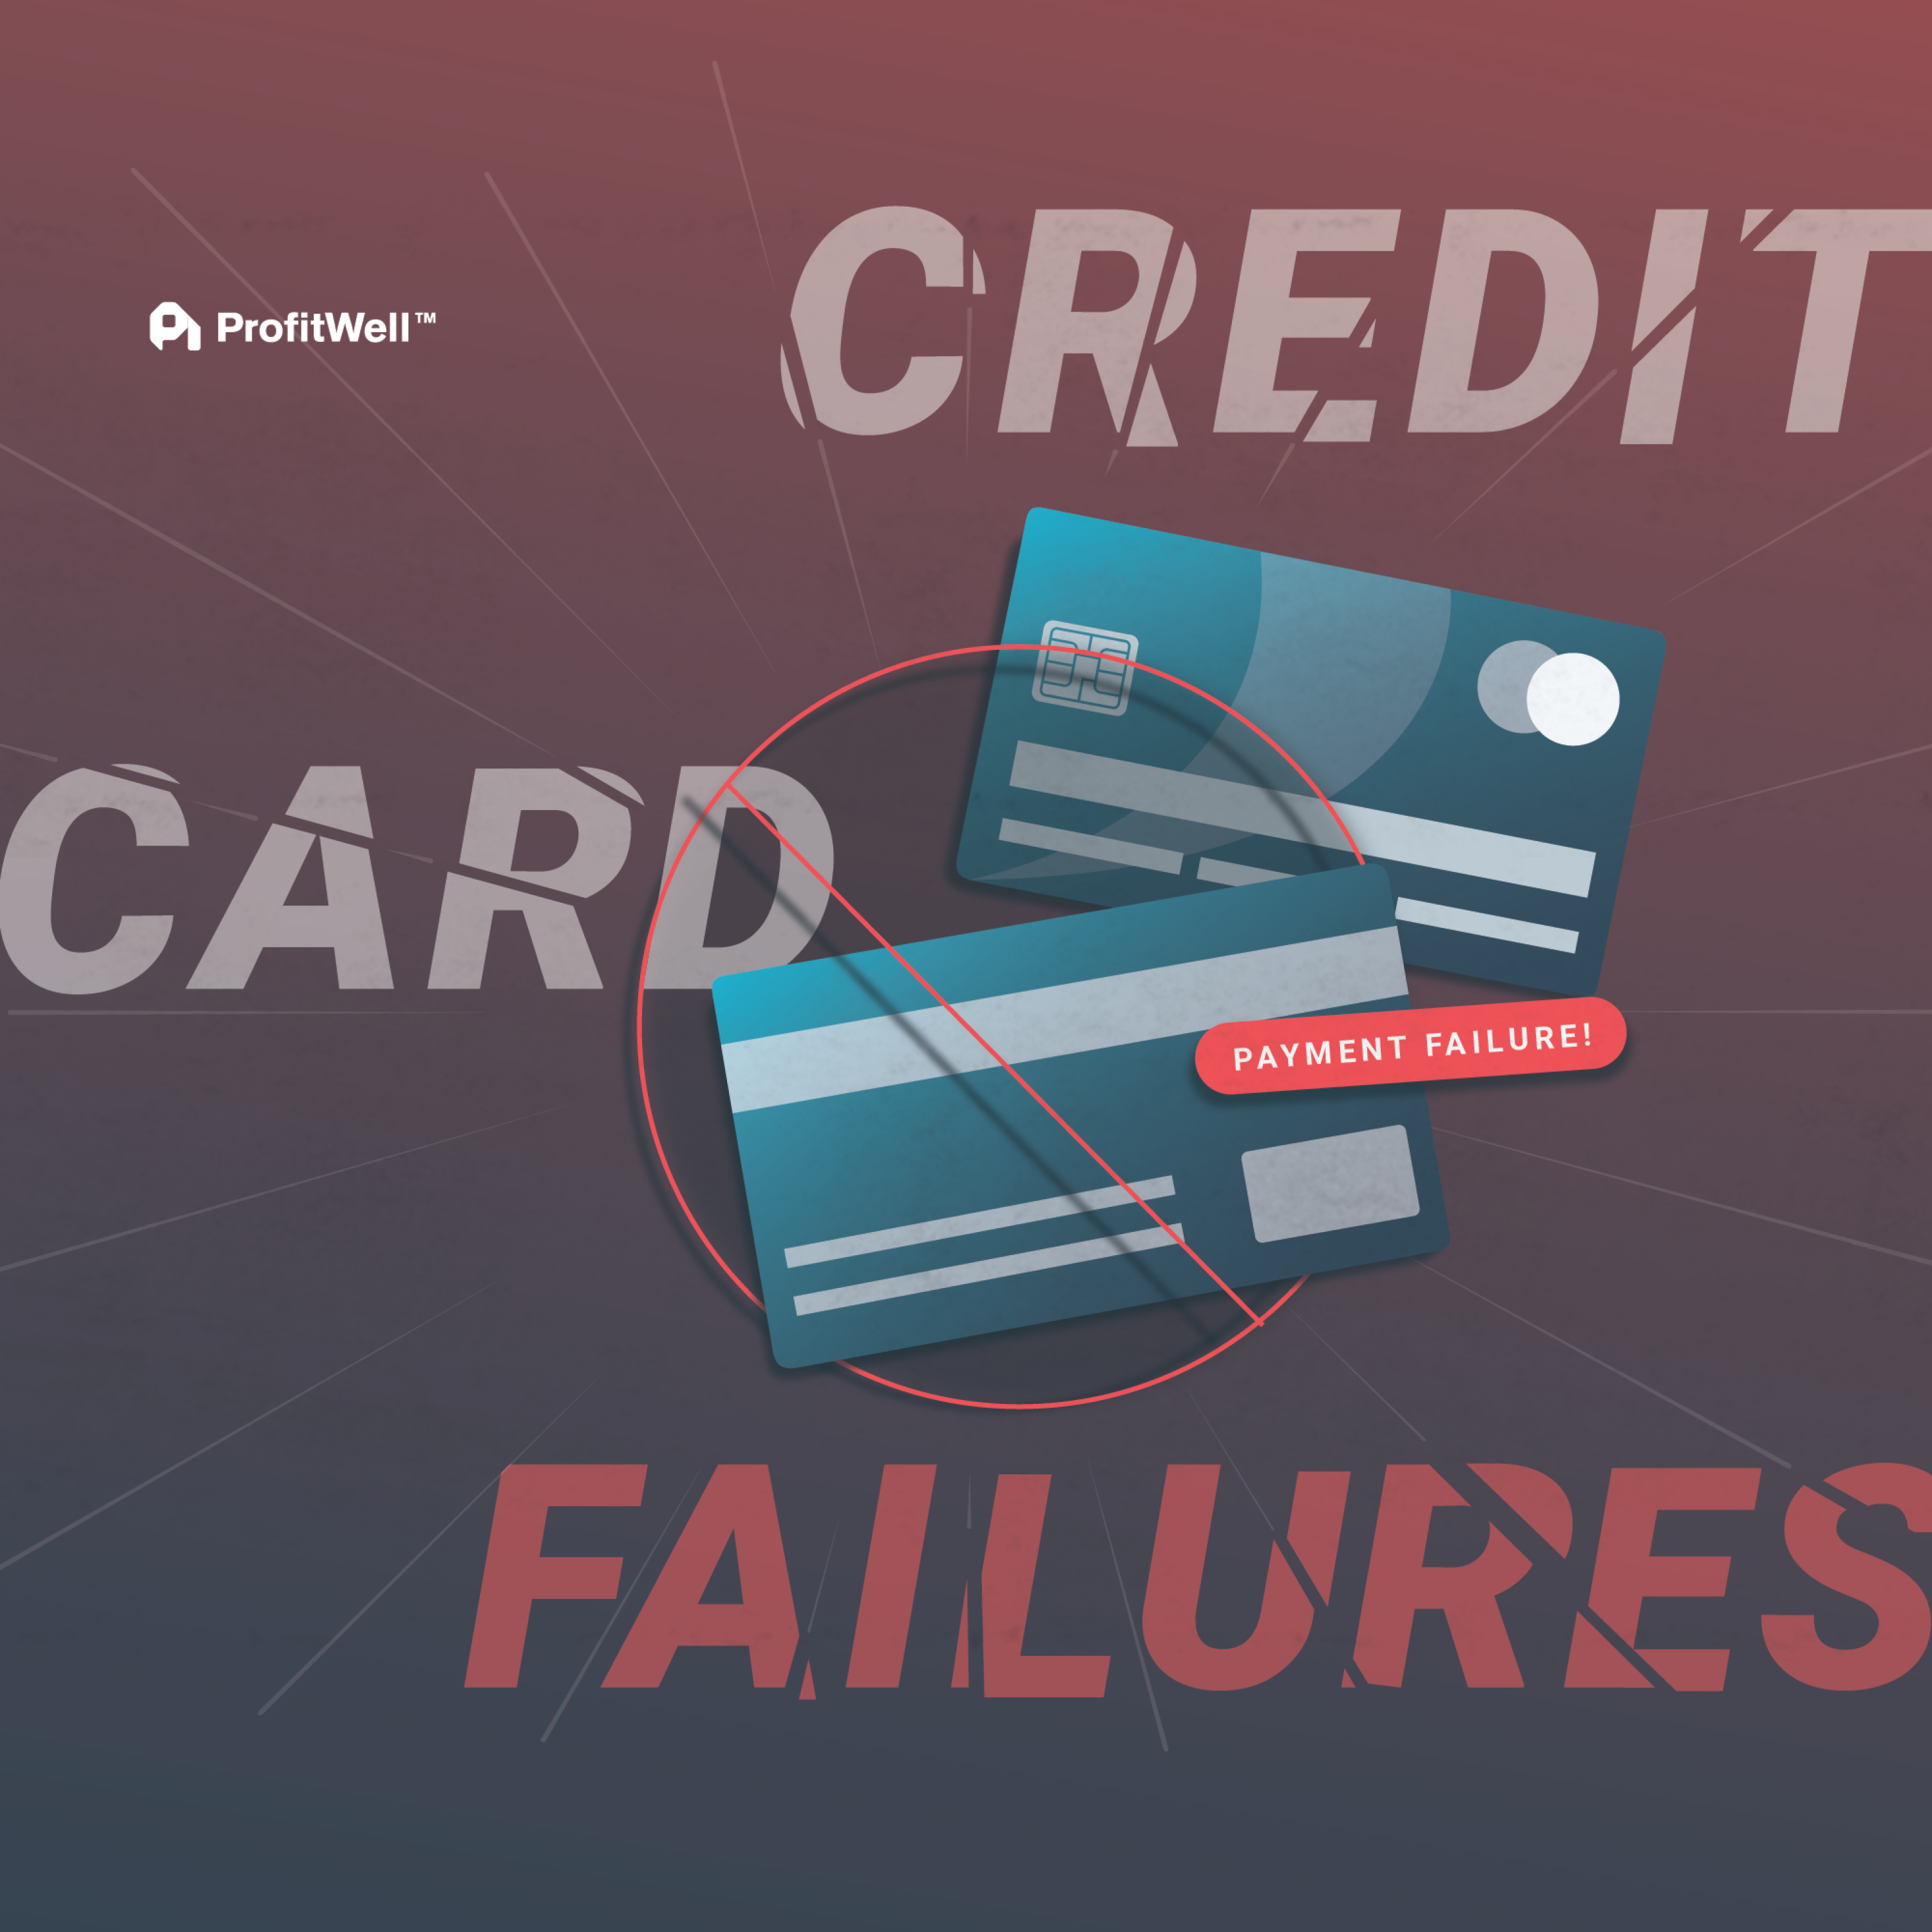 Chapter Two: How to recover failed credit and debit cards